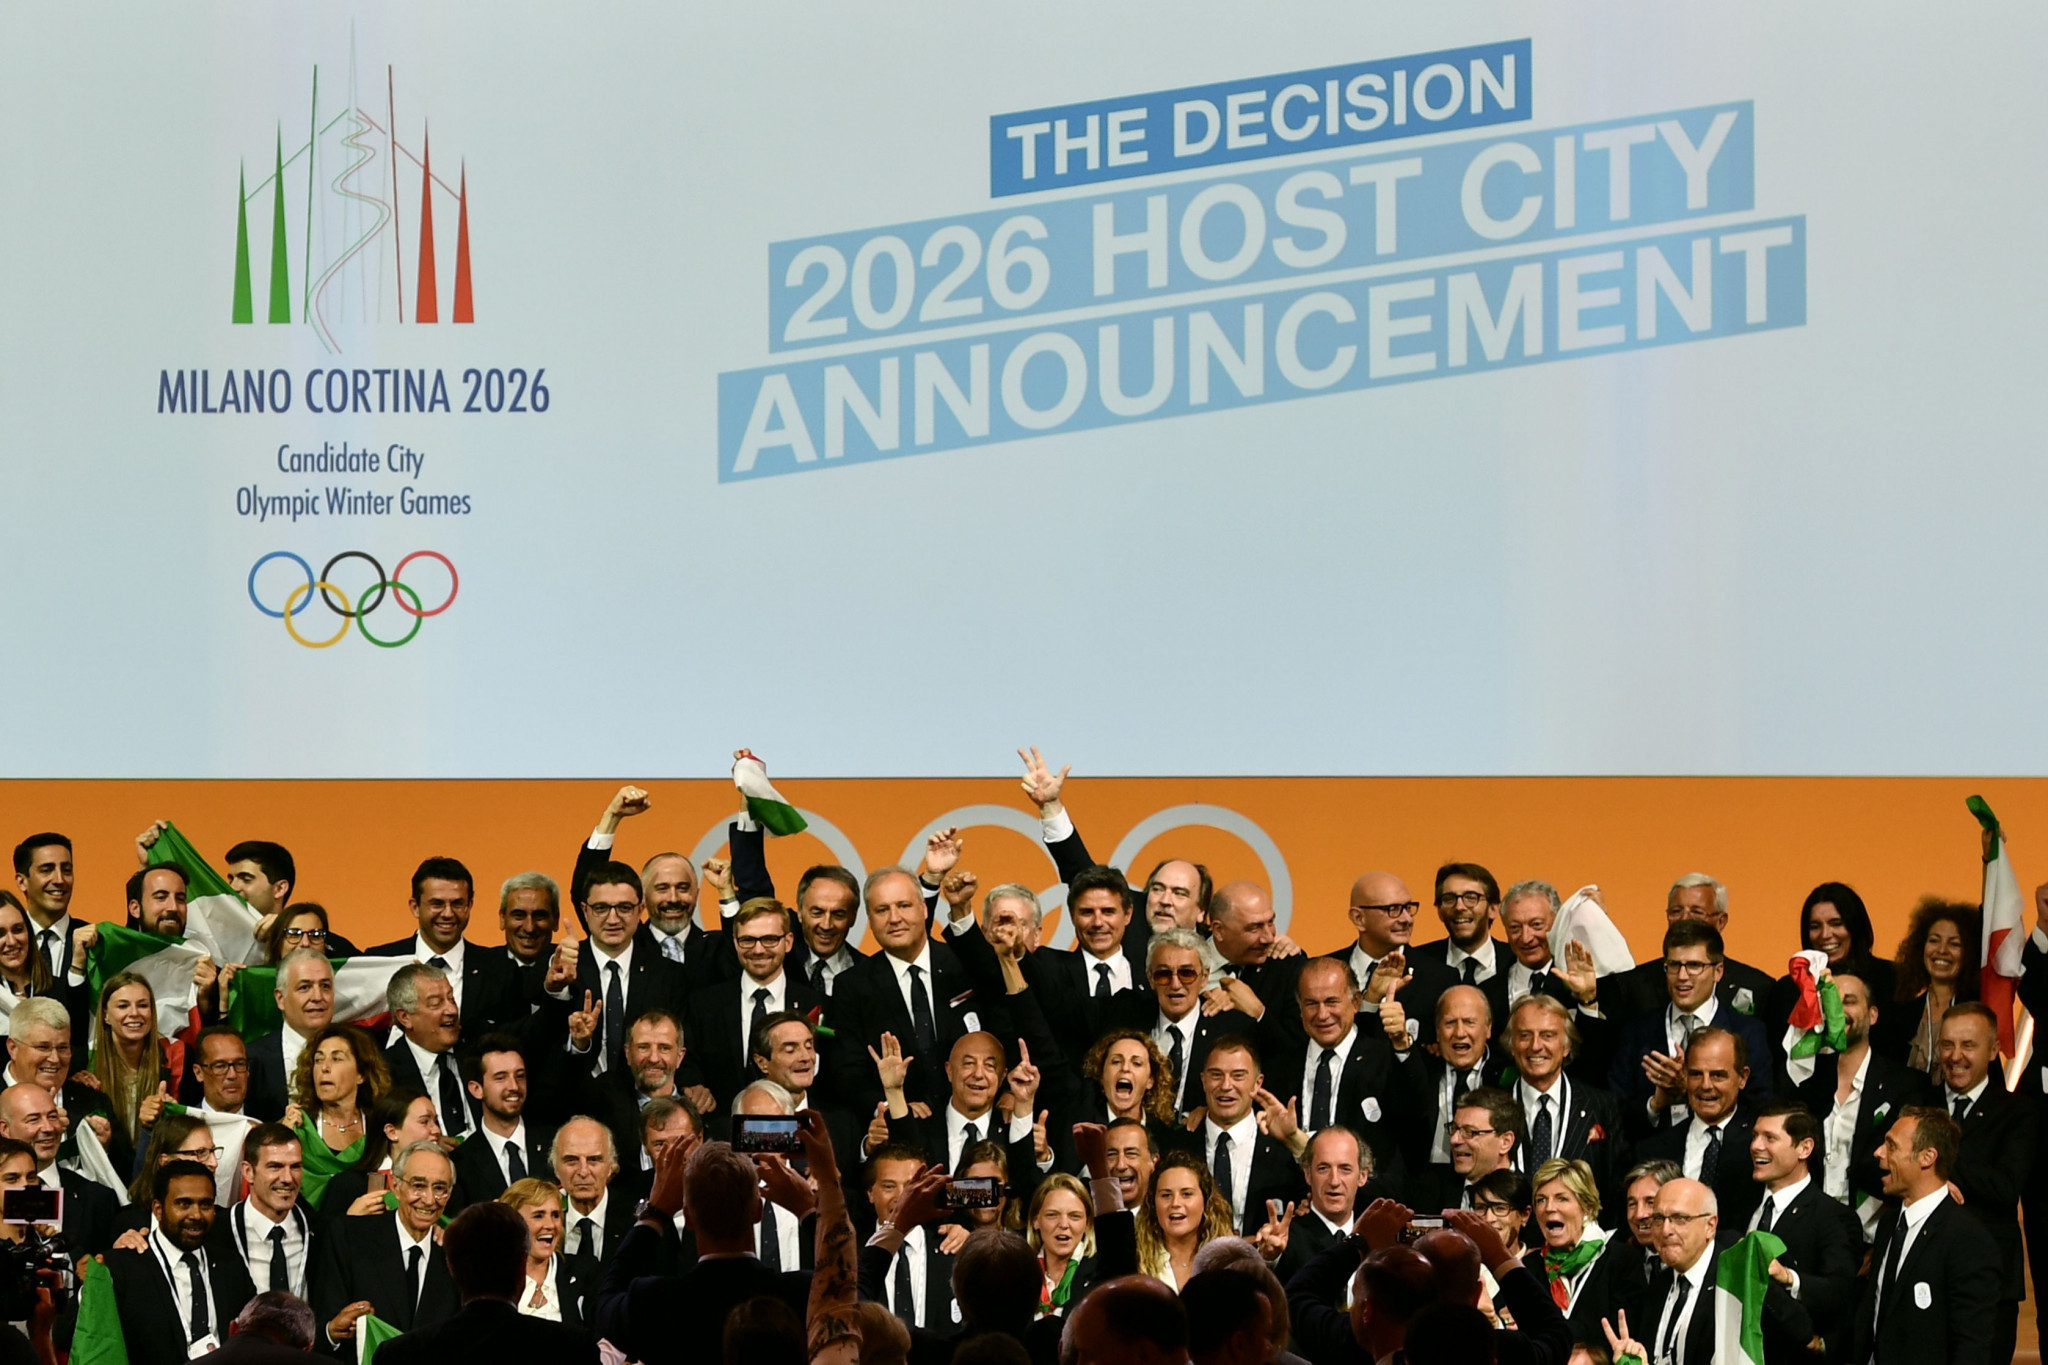 Milan Cortina 2026 budget remains same as initially proposed despite economic difficulty